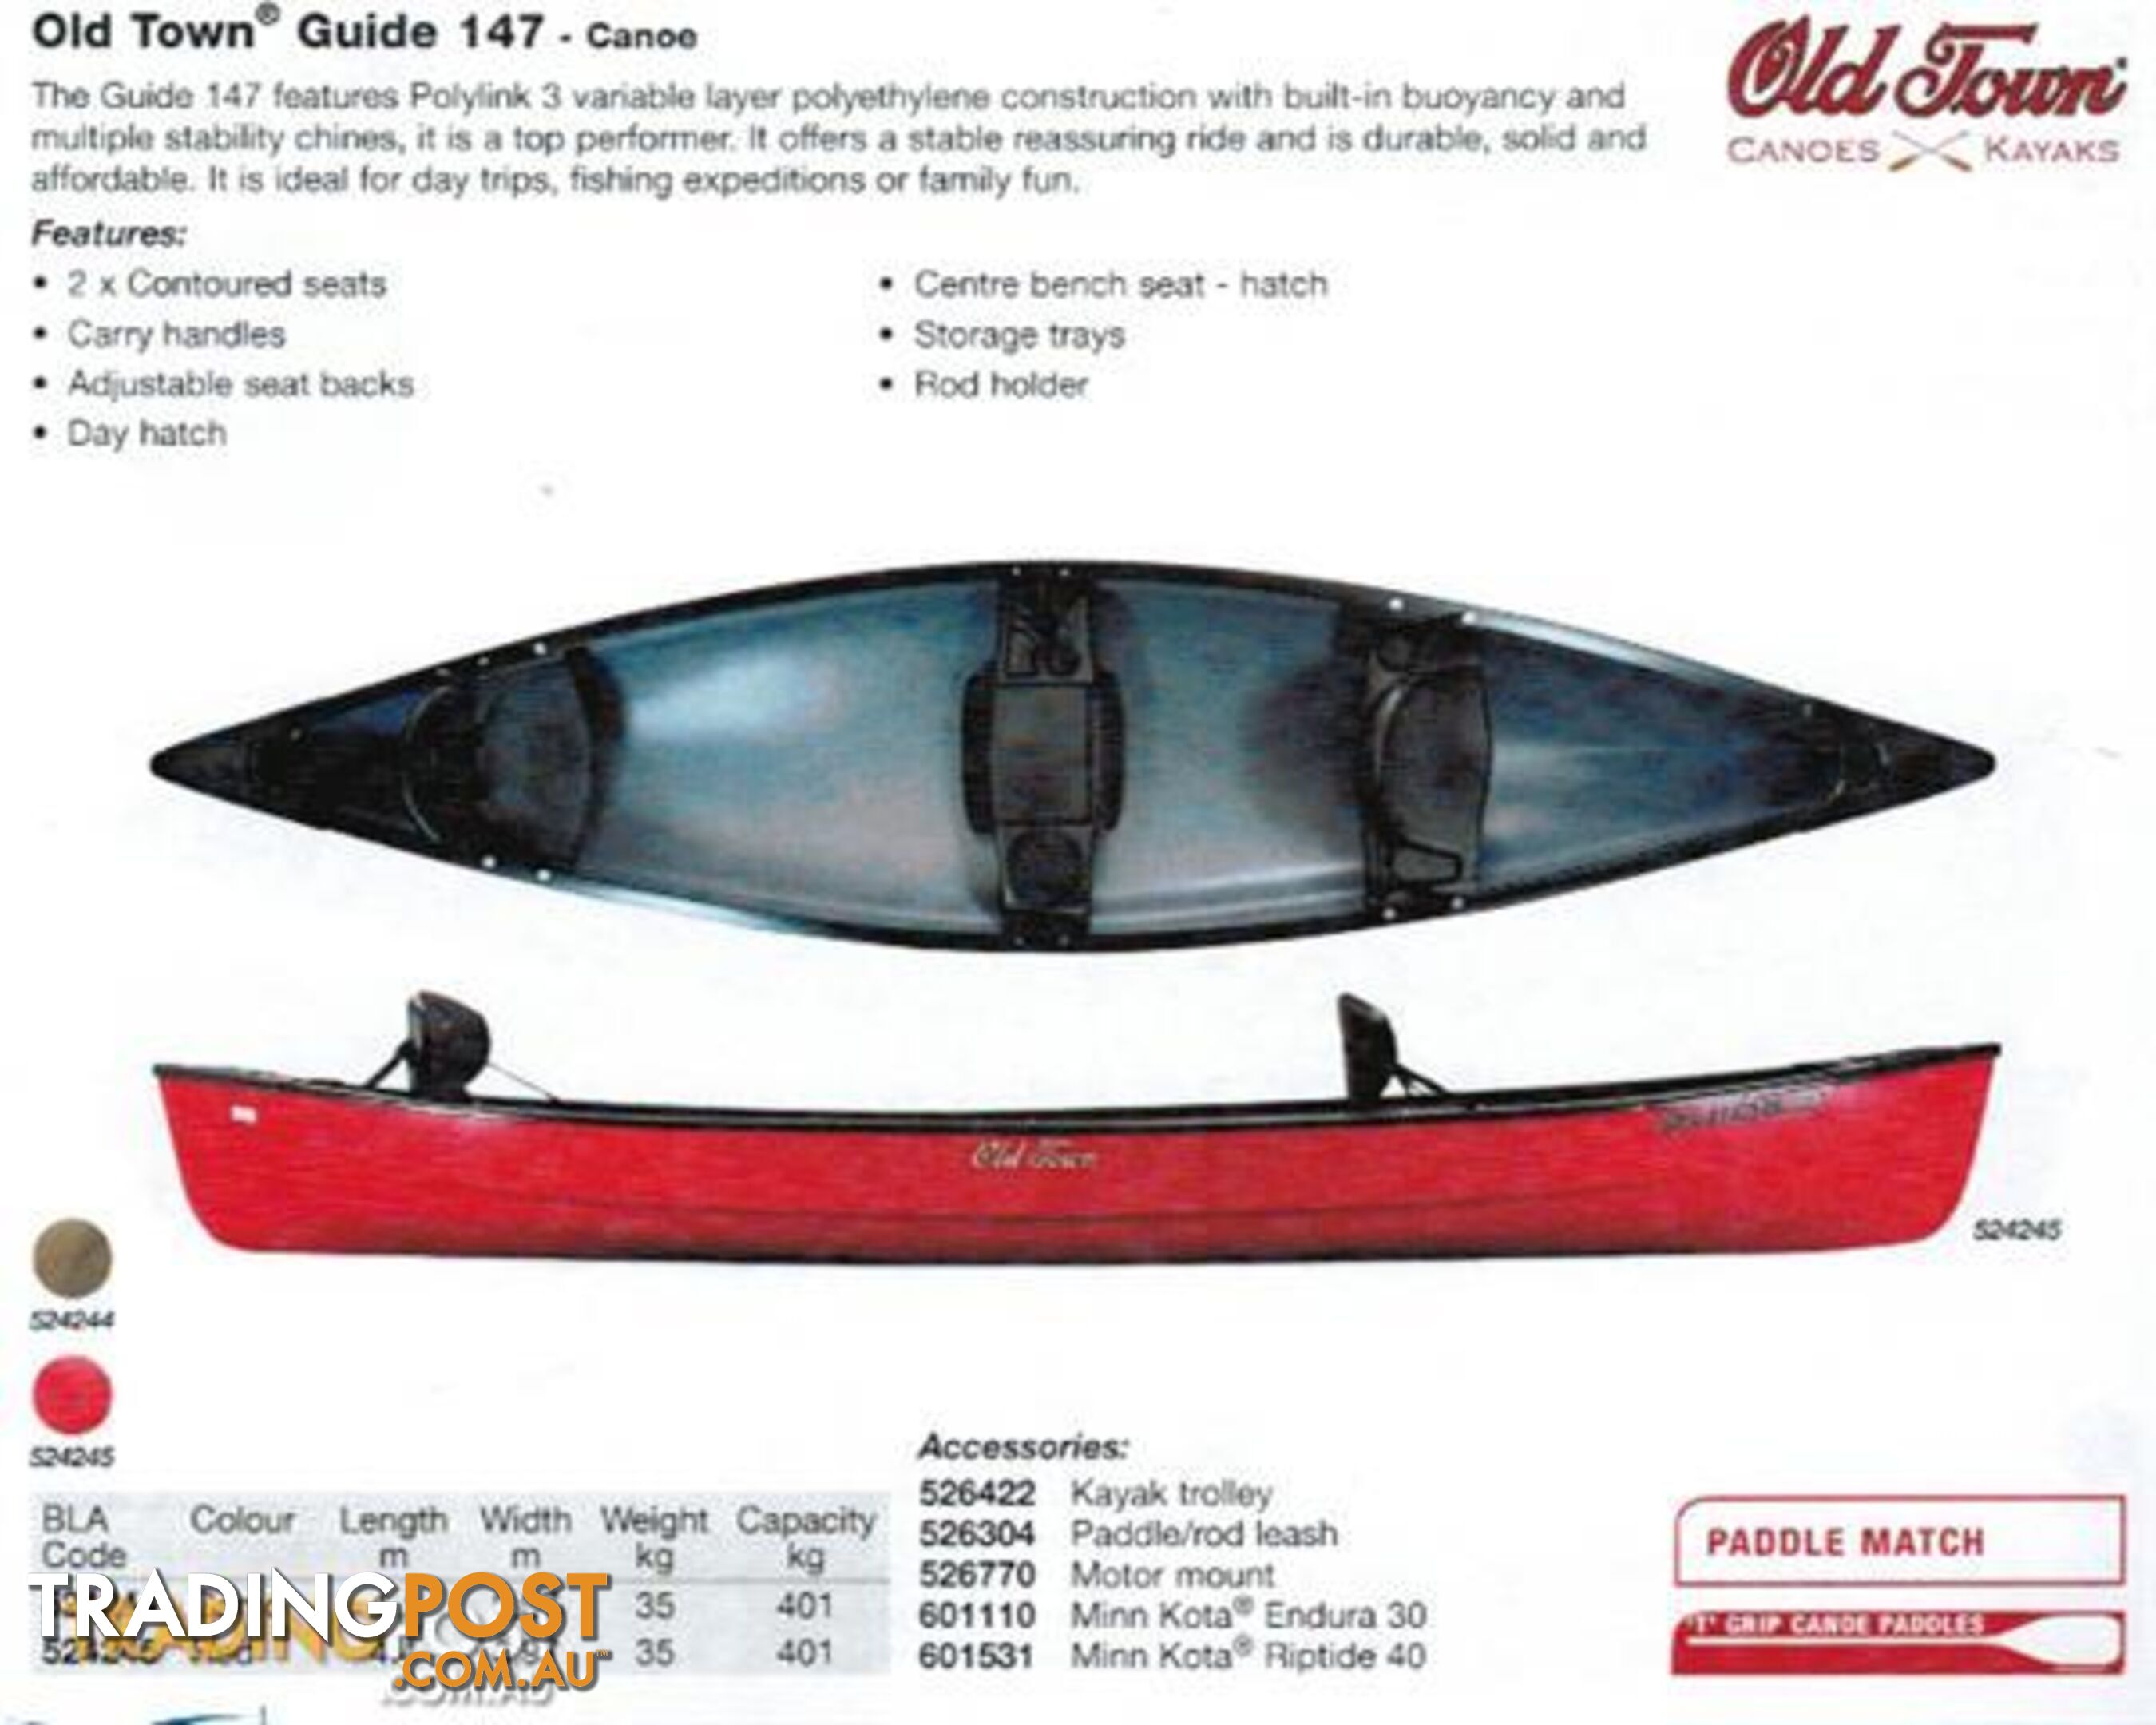 Brand new Canadian Canoes - biggest dealer is OZ by far!